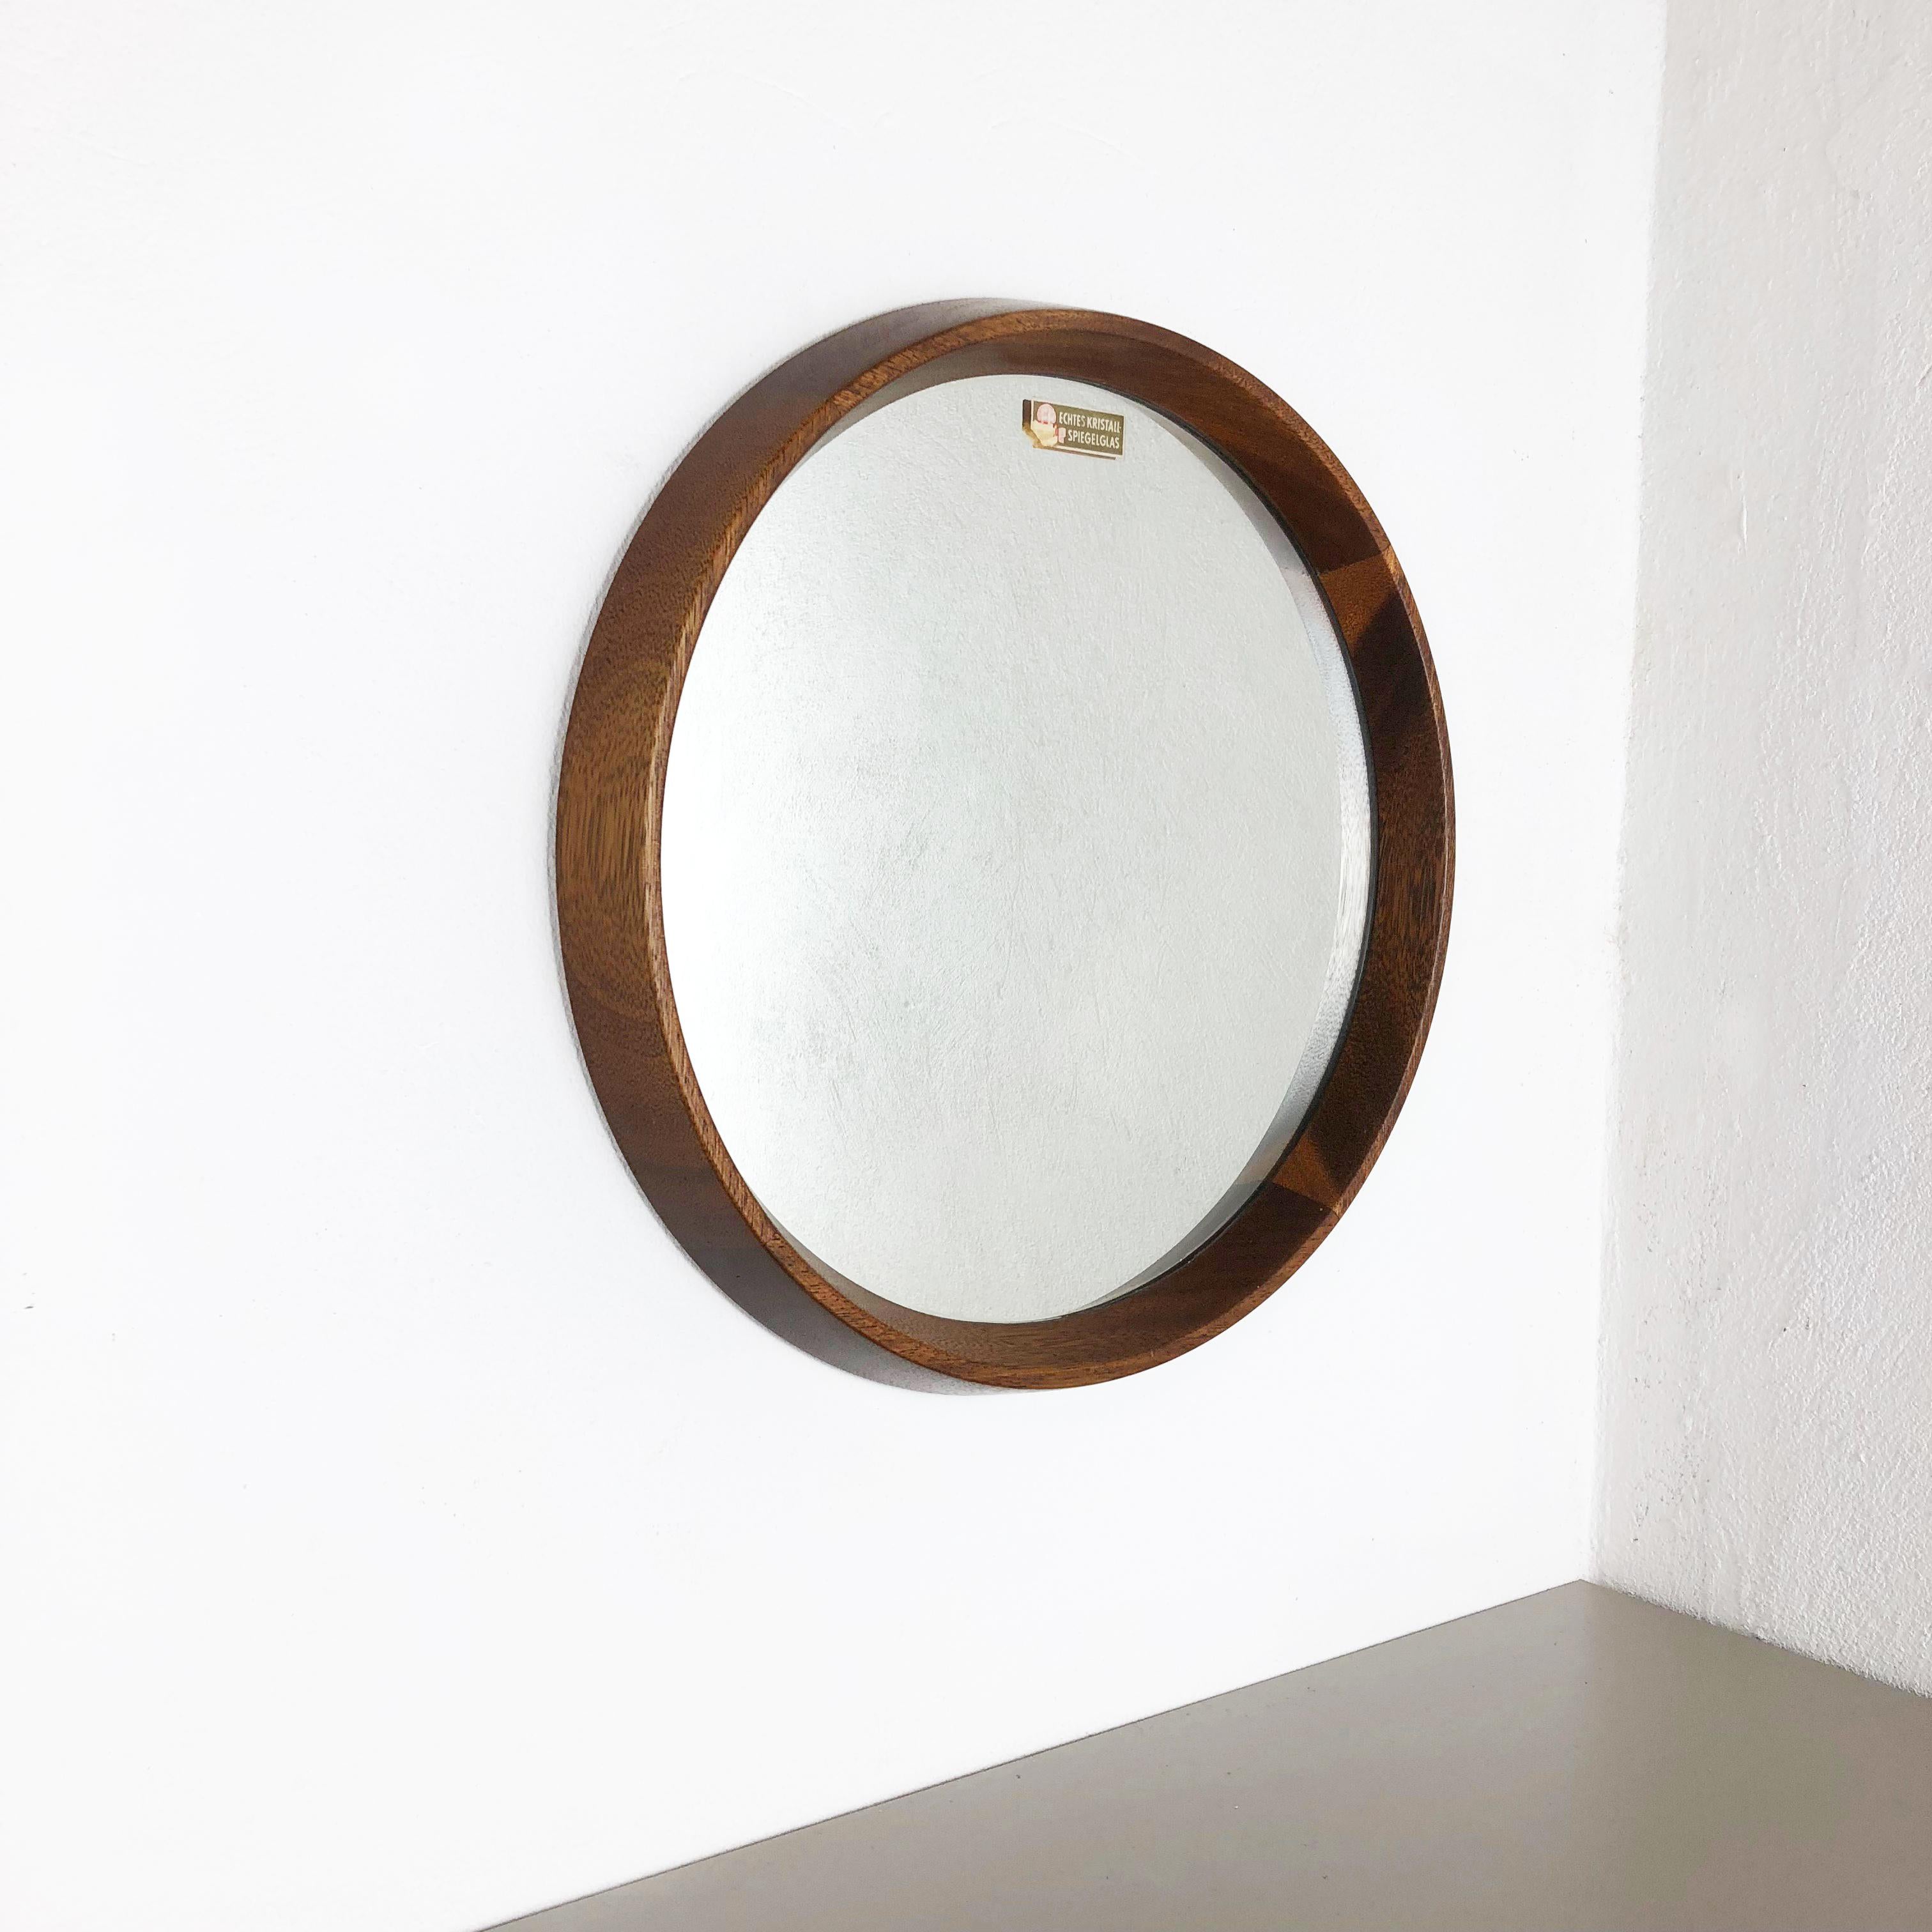 Article:

Solid wood mirror new old stock!


Origin:

Germany


AGE:

1960s




This original vintage solid wood mirror was produced in the 1960s in Germany. It is new old stock, it was stored in a shop since the 1960s, where such